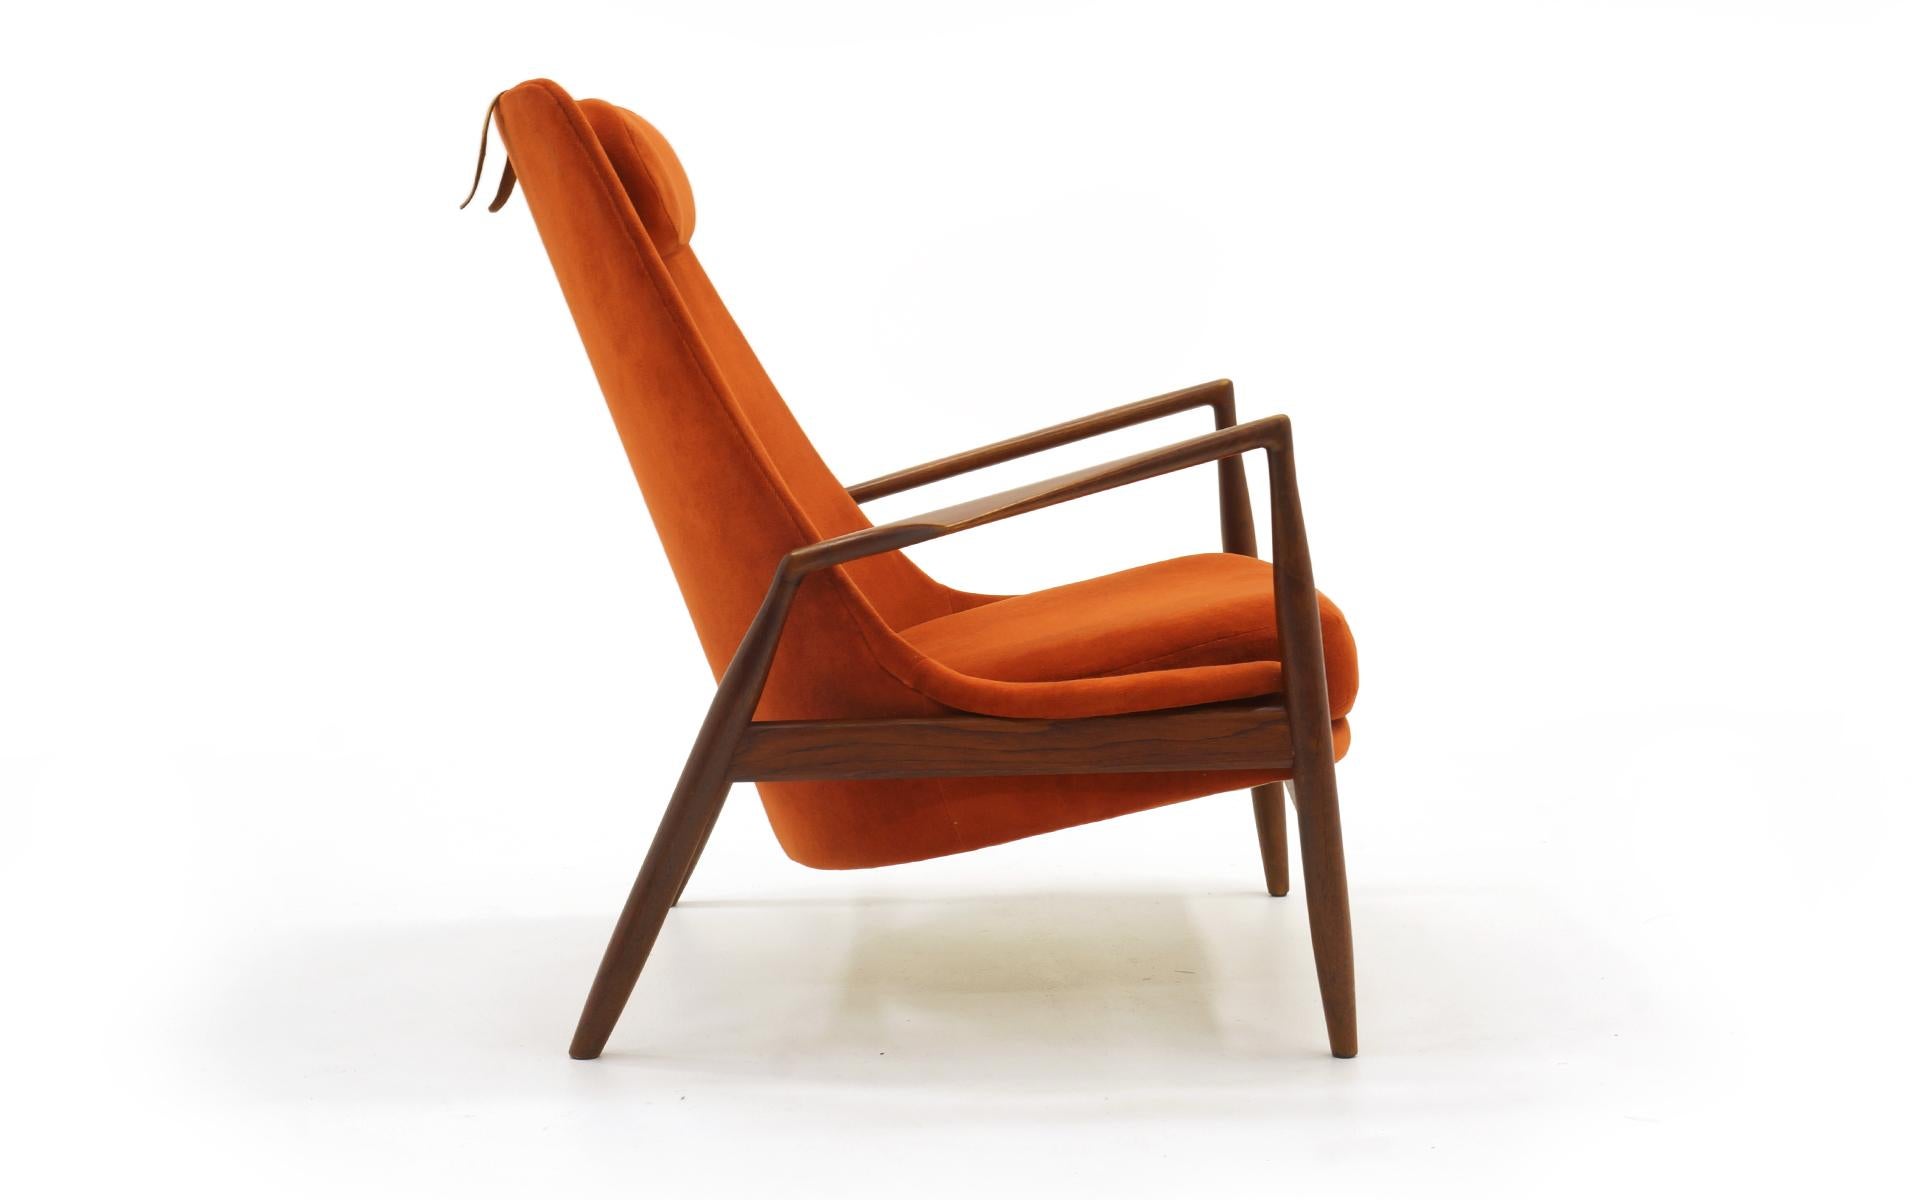 High back lounge chair in Teak with burnt orange velvet by ib Kofod Larsen for OPE, Sweden. Also see our listing for a pair of complimenting Seal chairs, one in burnt orange like this and one in the same fabric, but brown color. The fabric feels